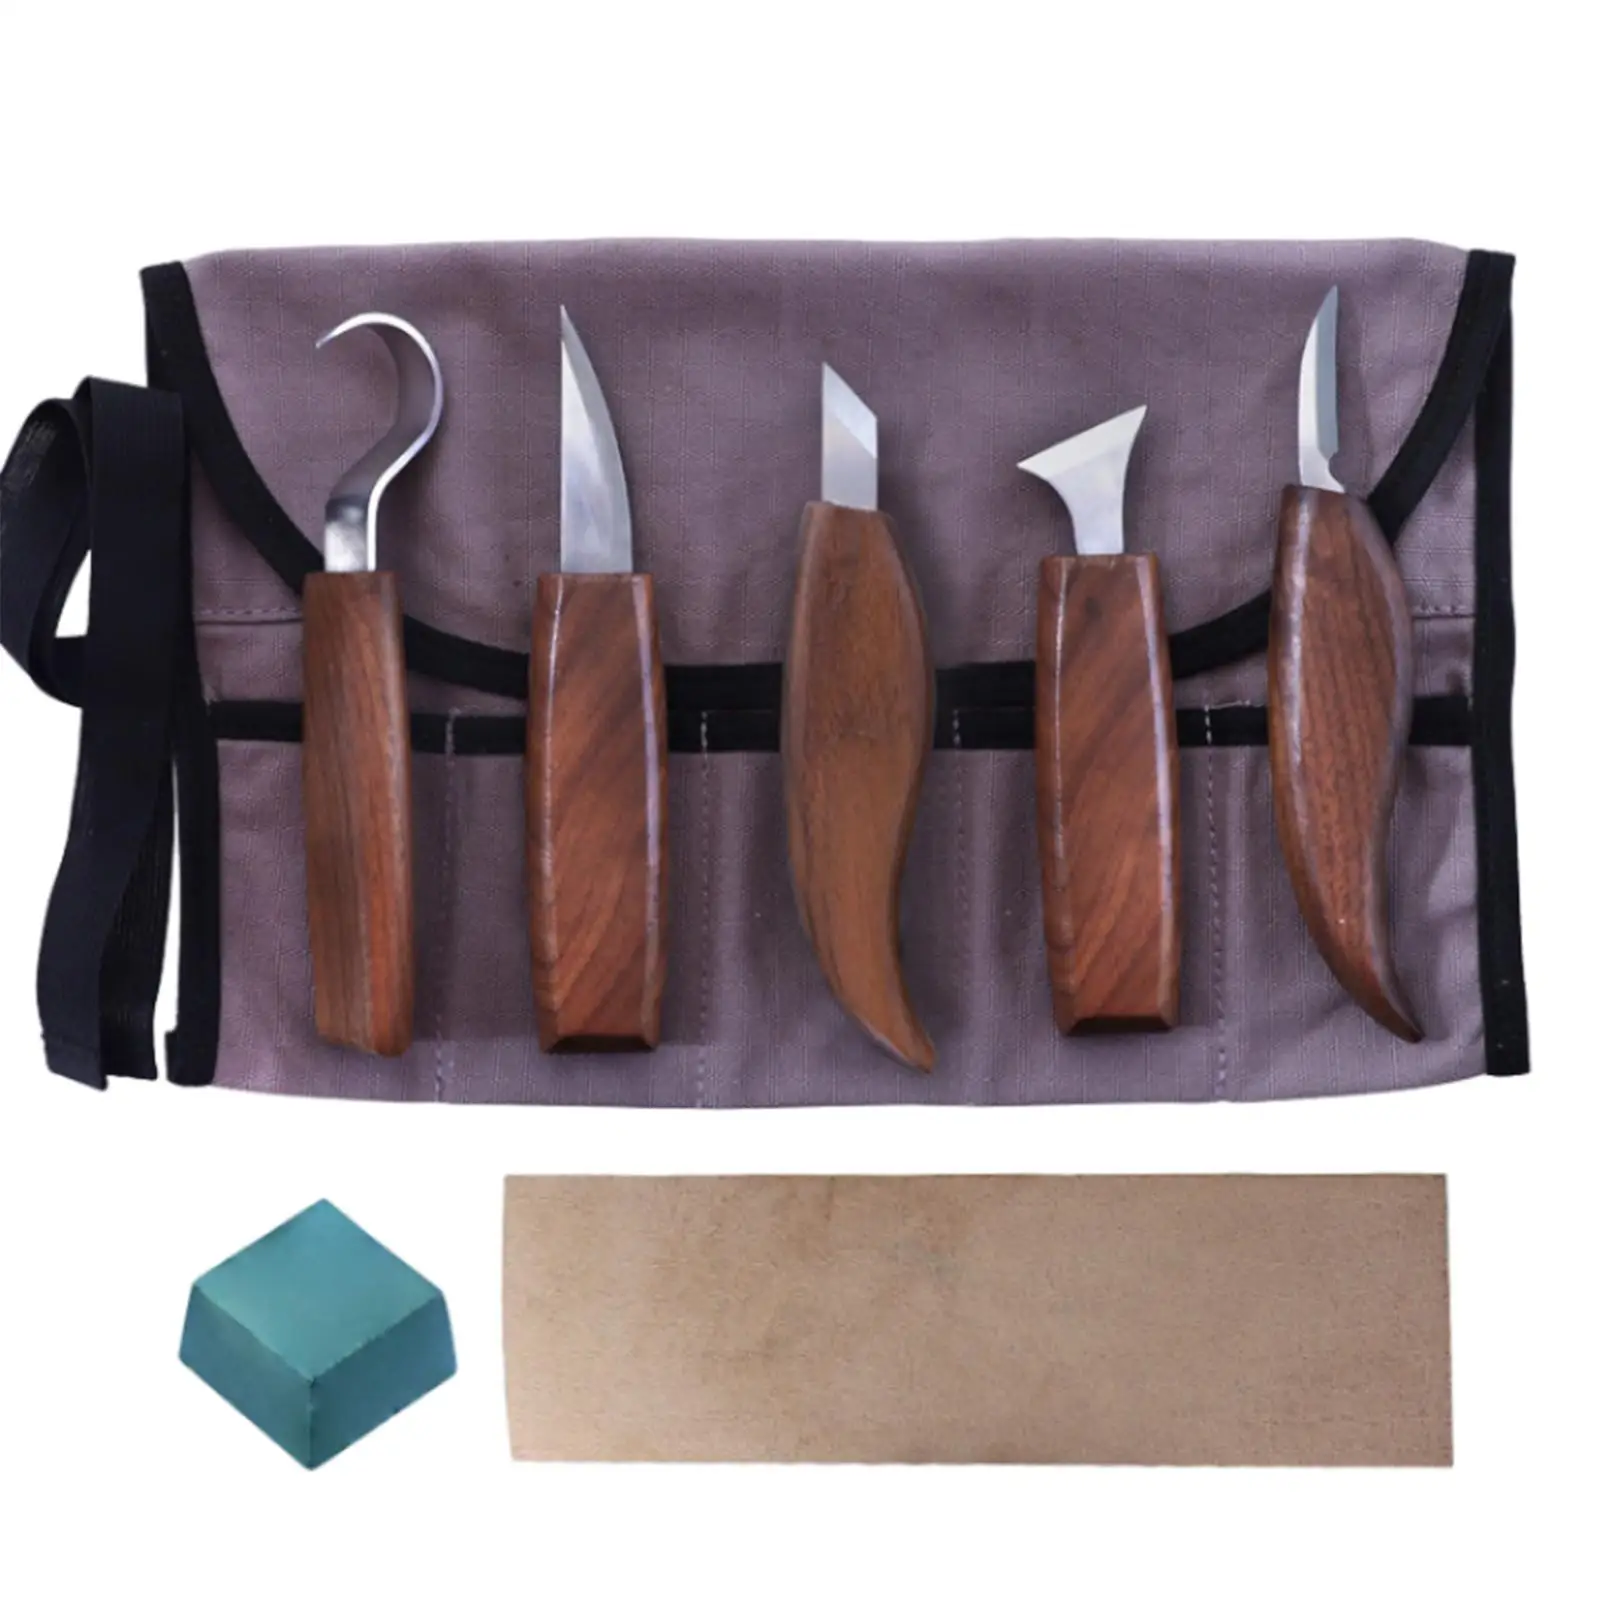 8Pcs Hand Carving Knife Set Flat Handle Wear Resistant Wood Carving Kits for Handmade Wood Carving Plaster Carving Kids Adults